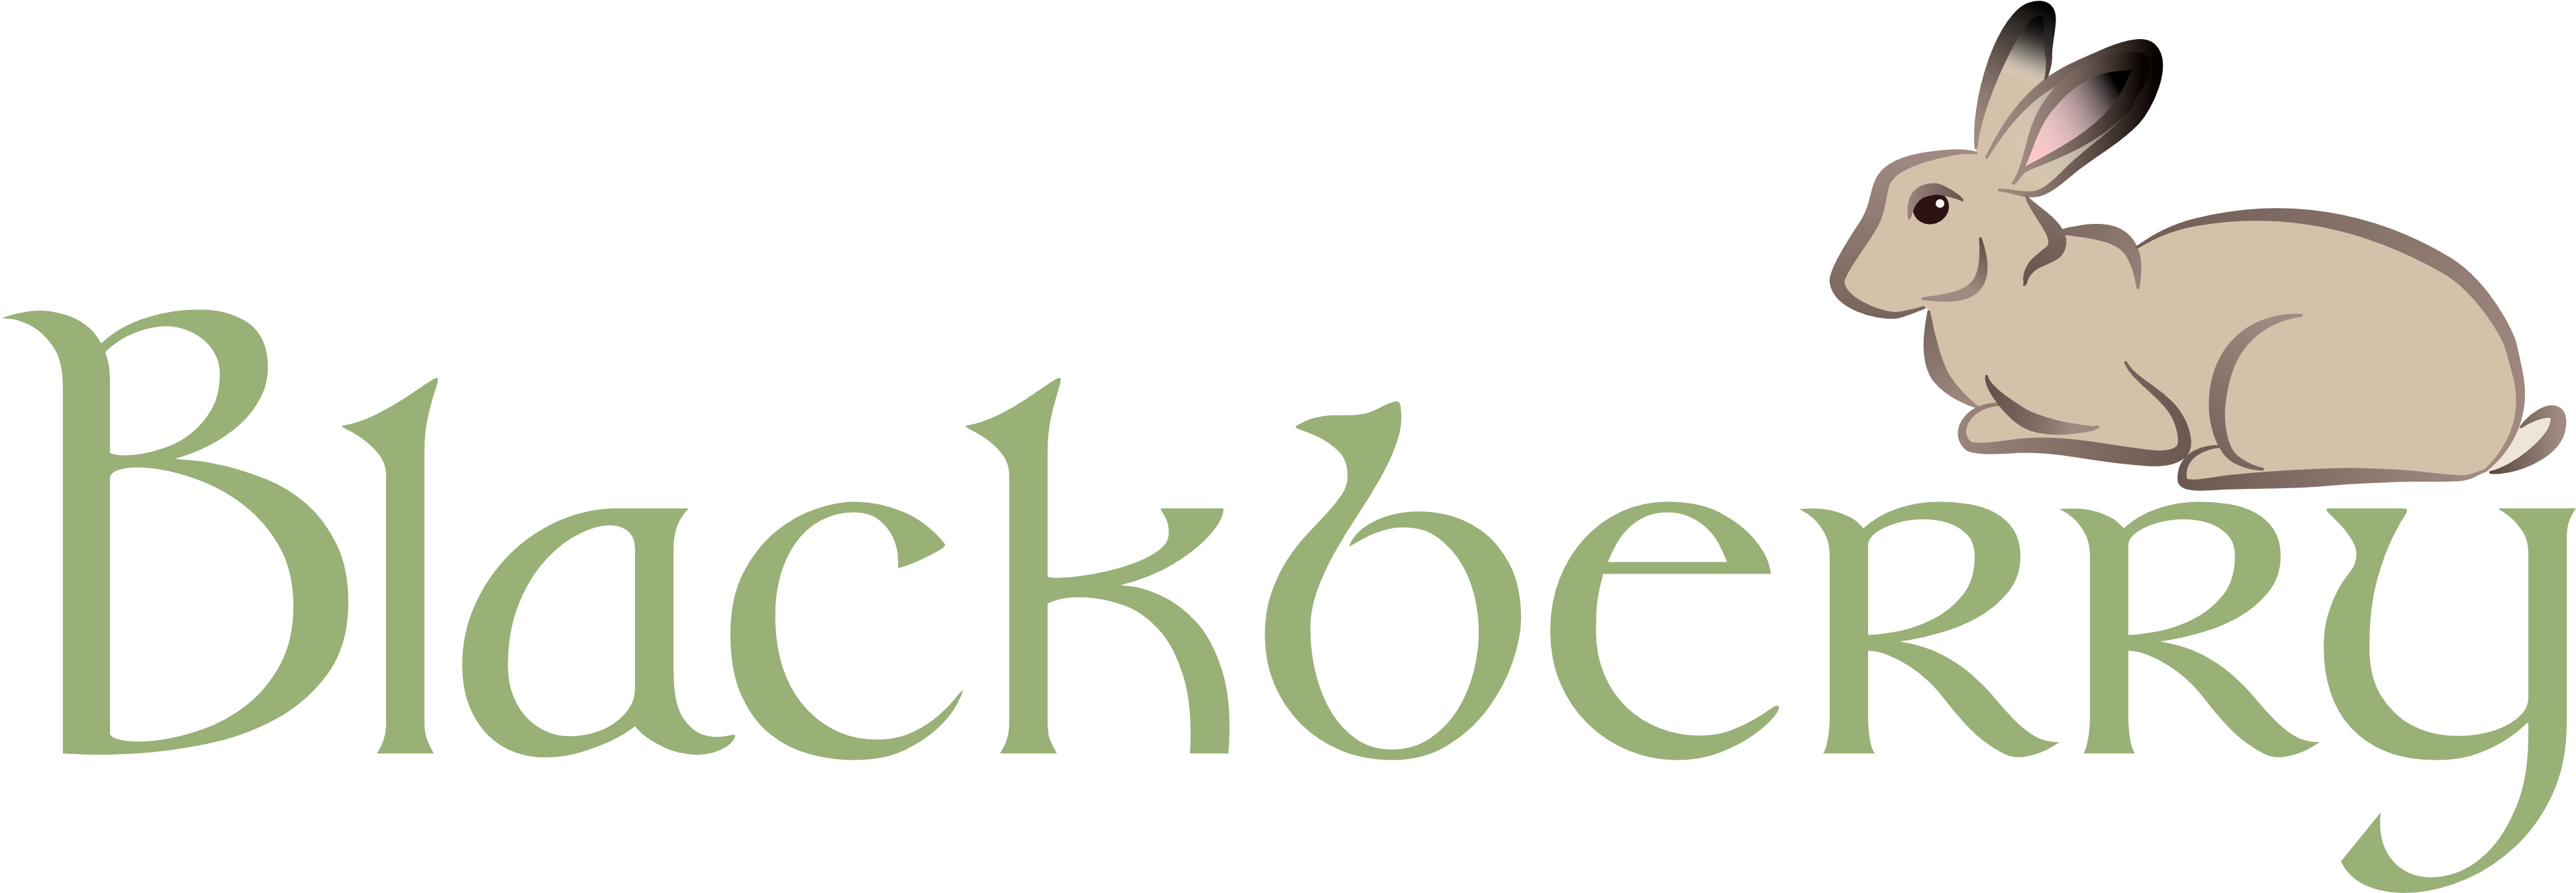 The Blackberry wordmark and illustration of Blackberry, a brown rabbit with black-tipped ears from Watership Down.